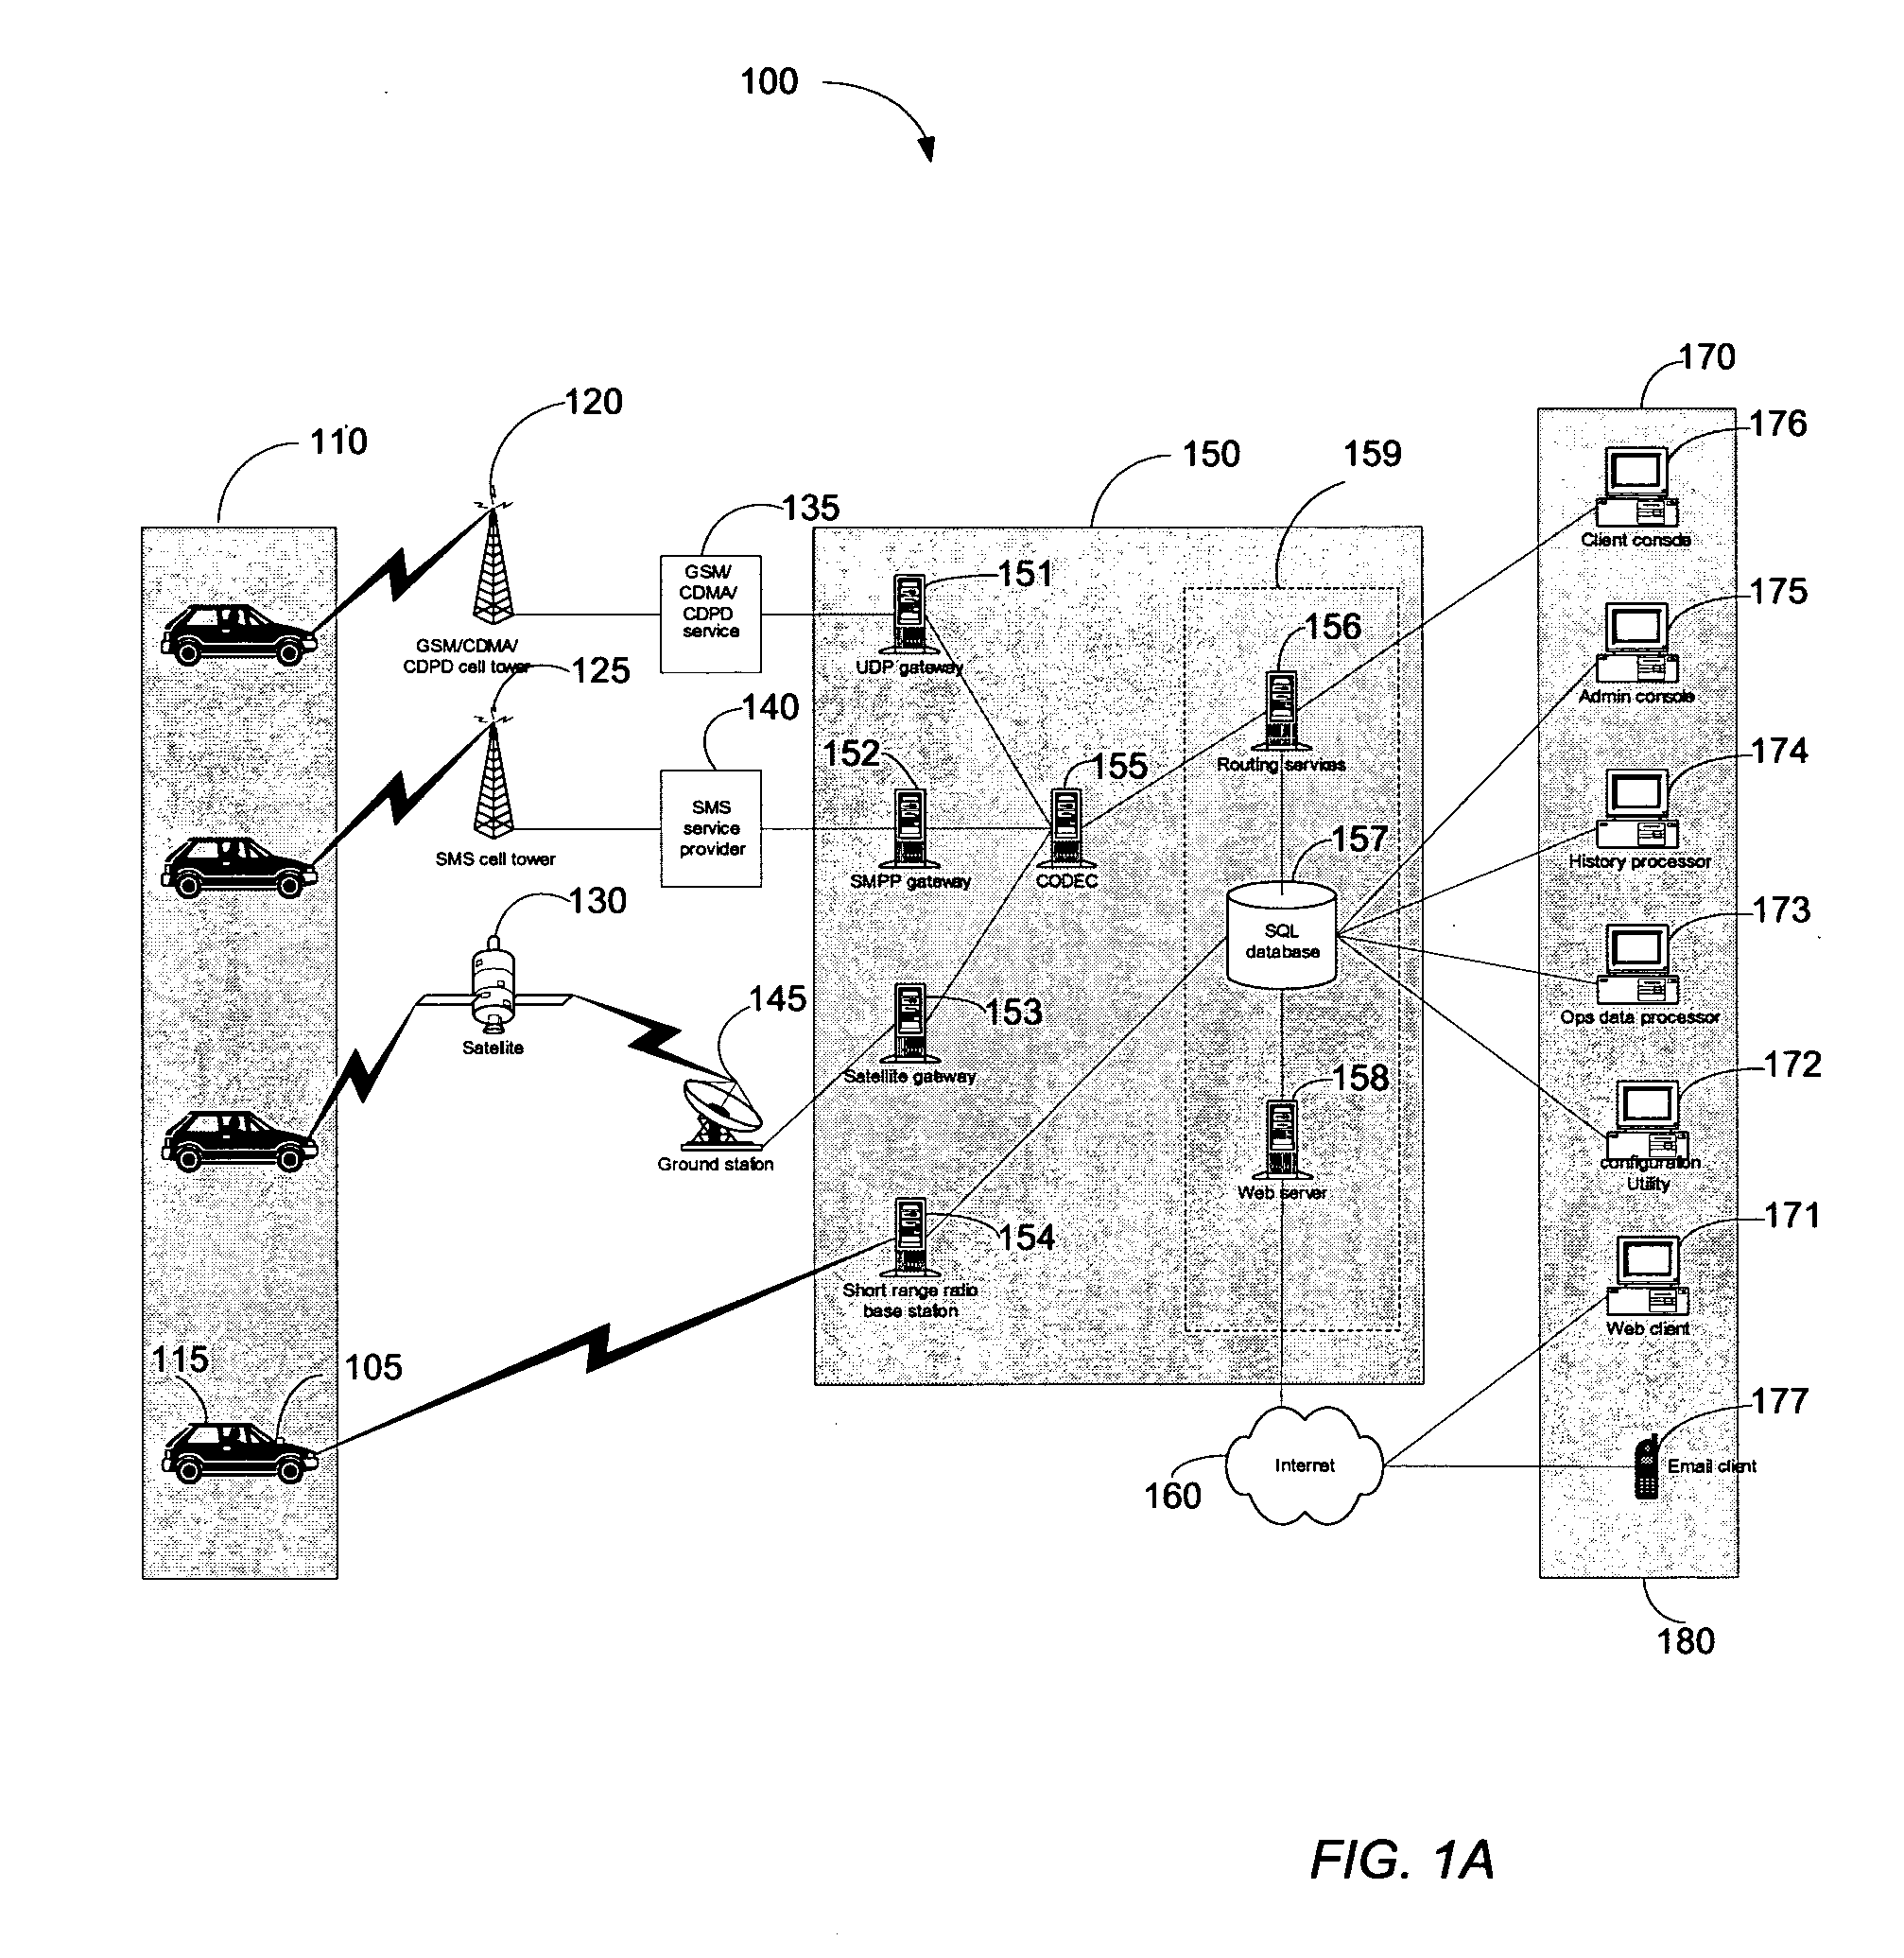 Method and system to control movable entities